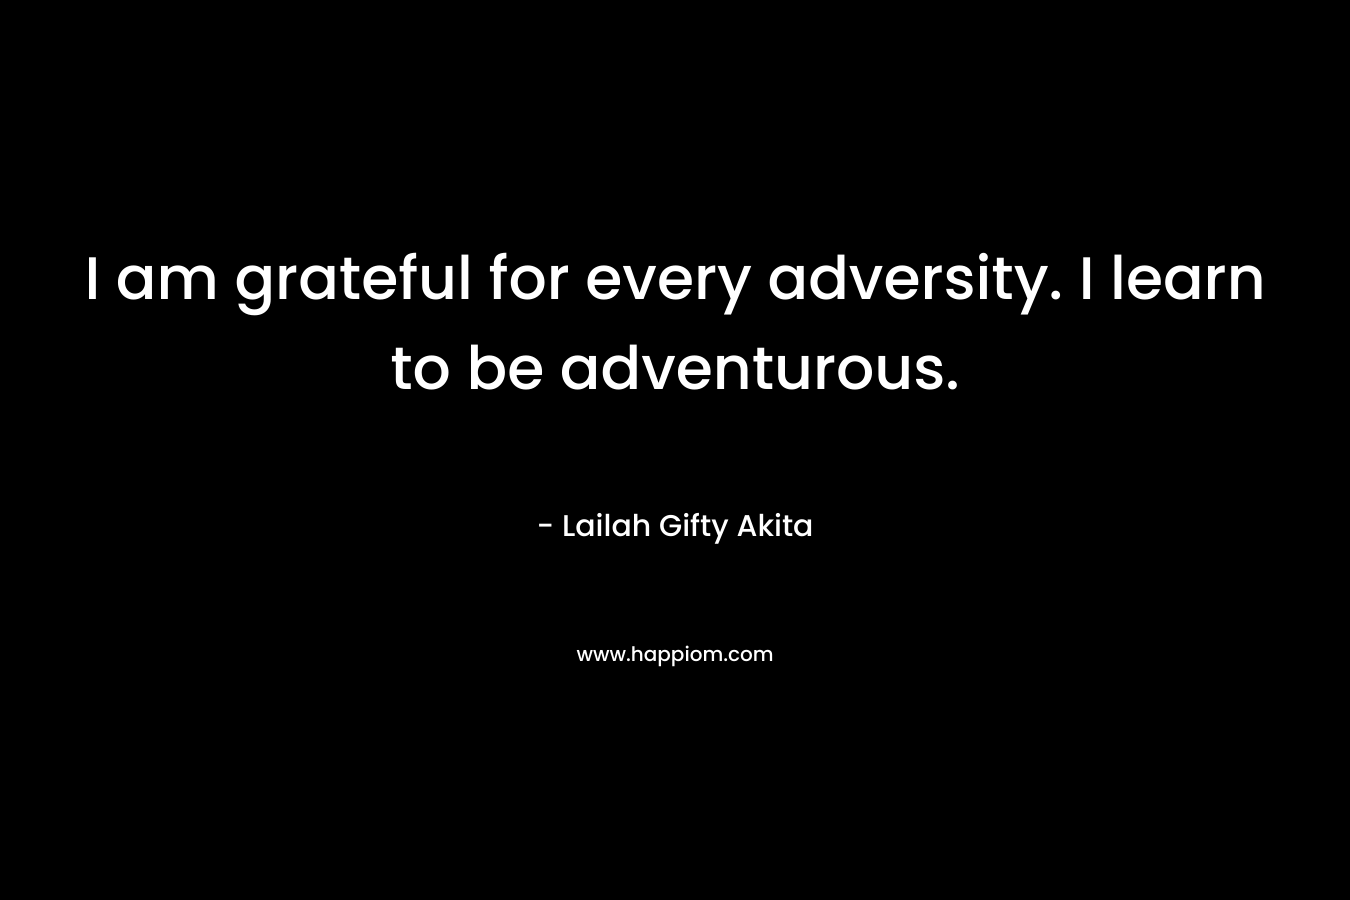 I am grateful for every adversity. I learn to be adventurous.